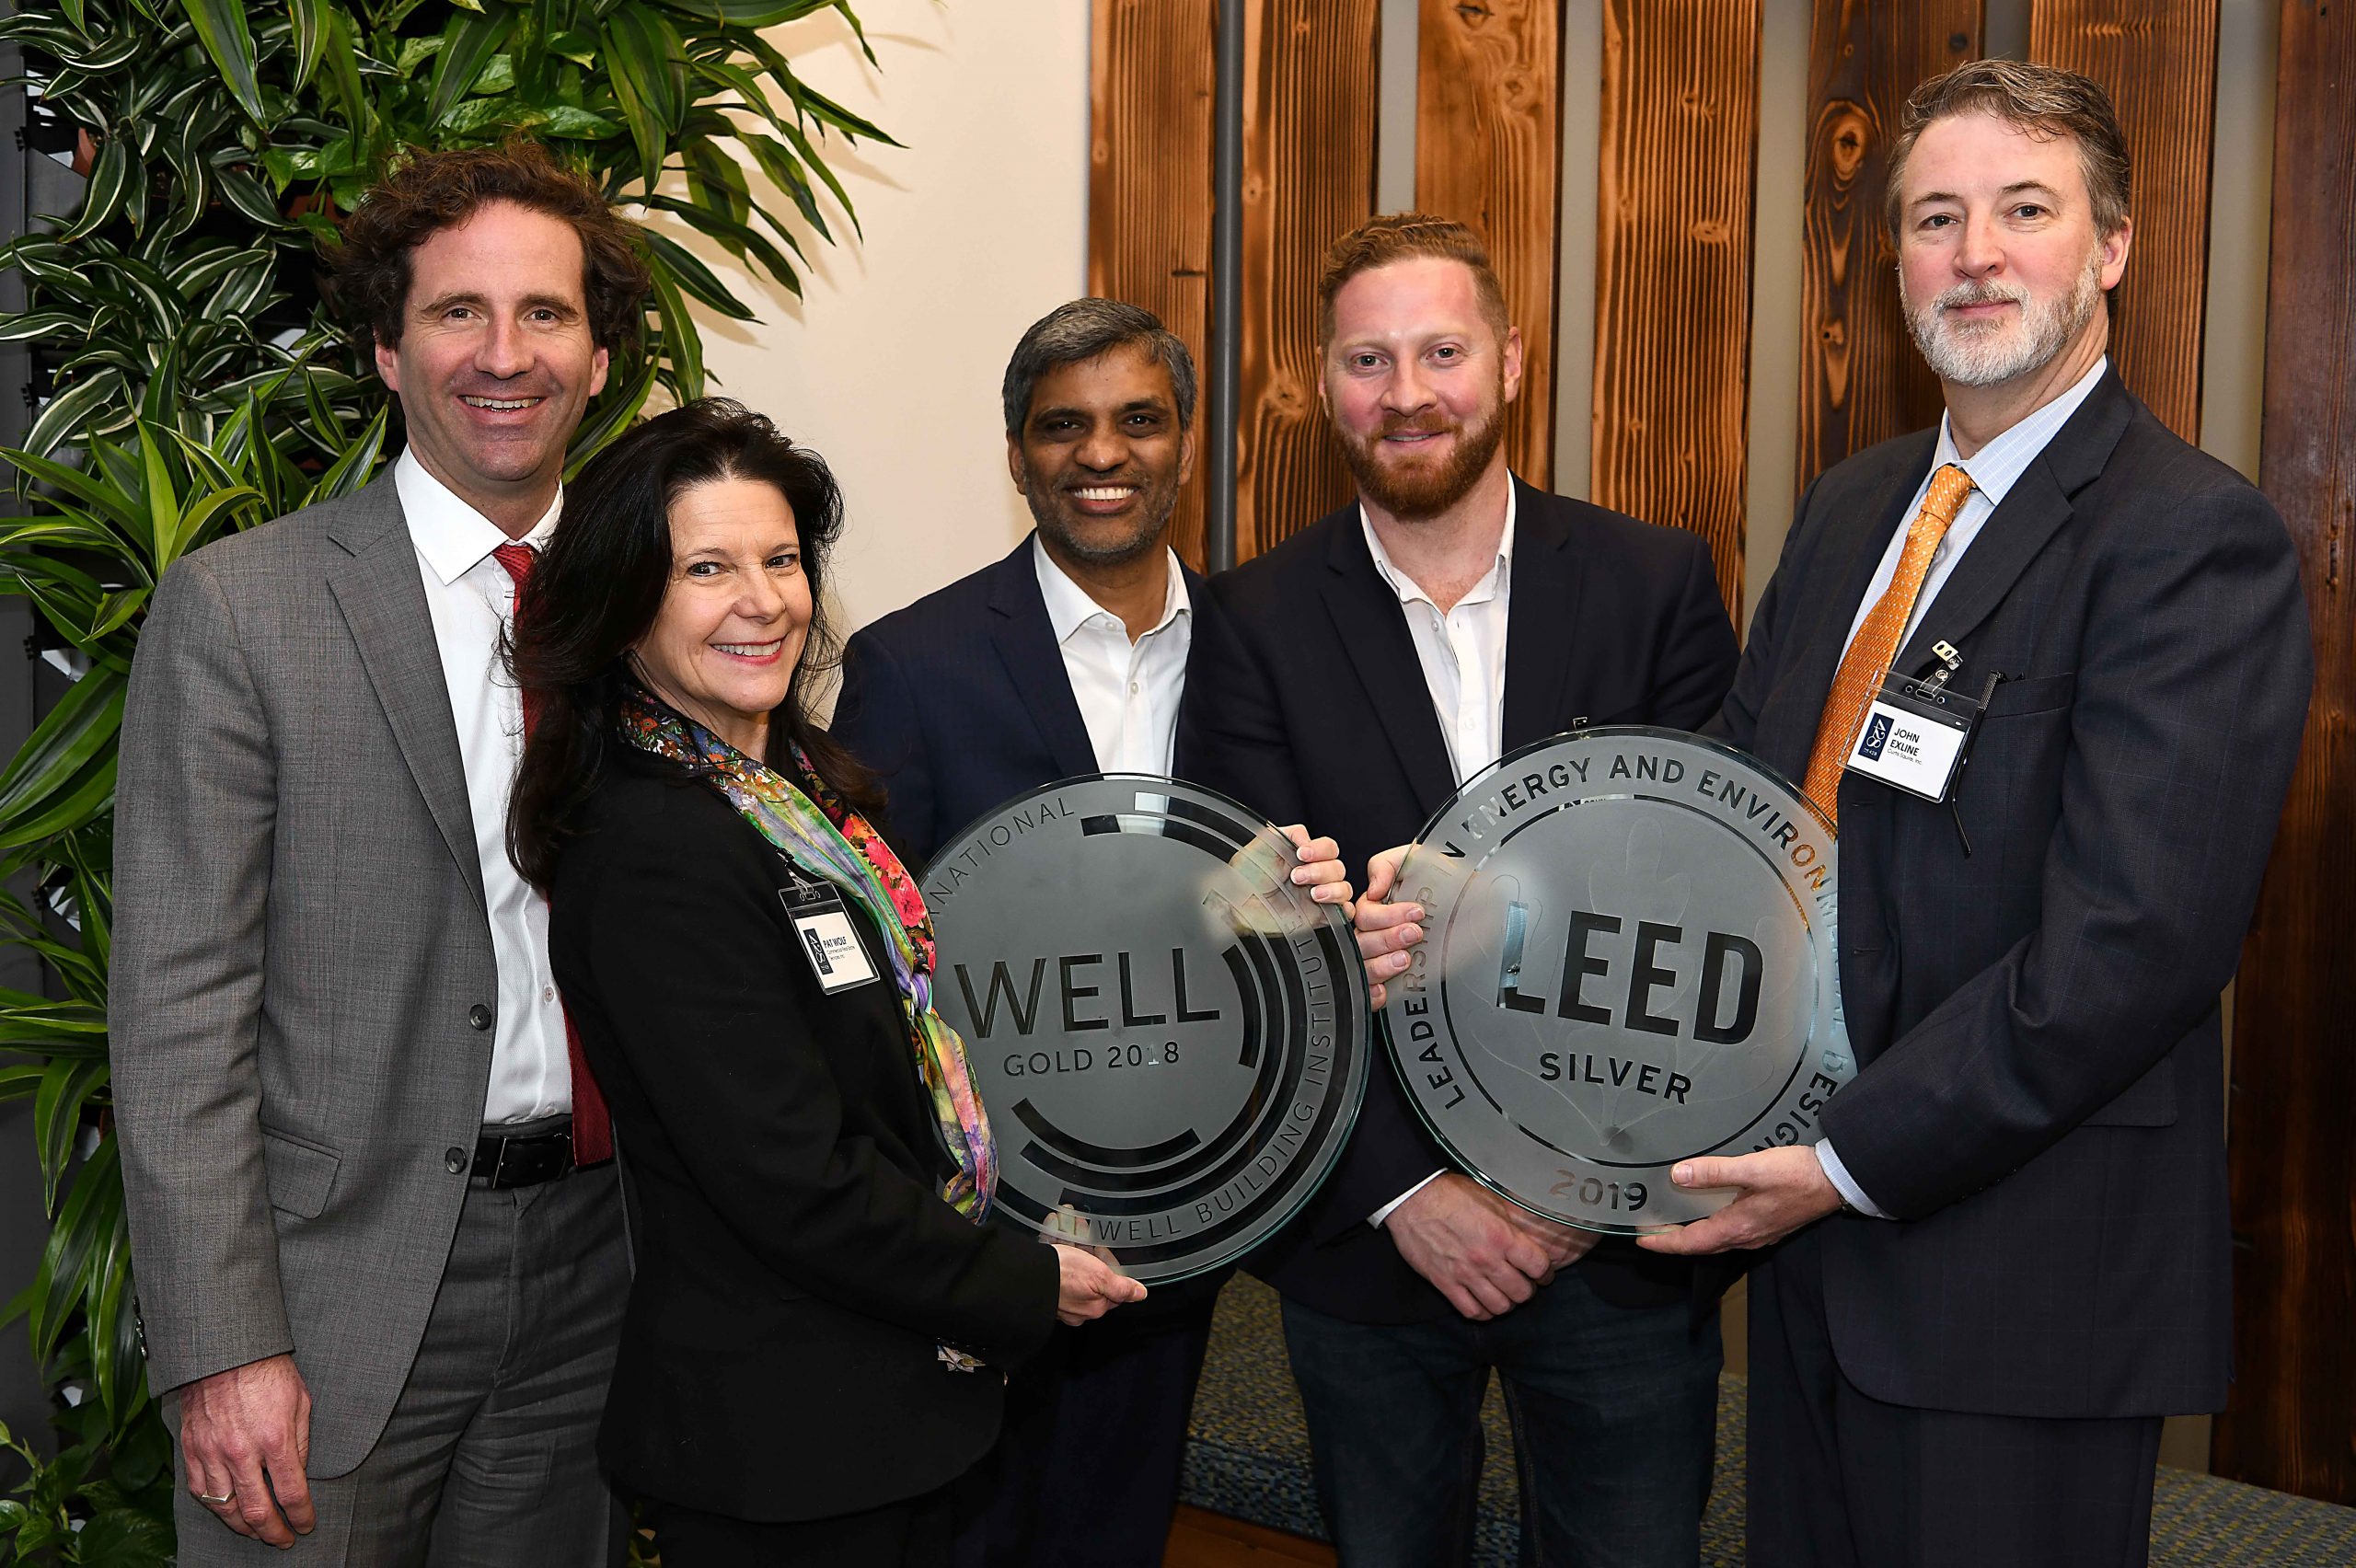 428 Building LEED Silver April 9th 2019-6